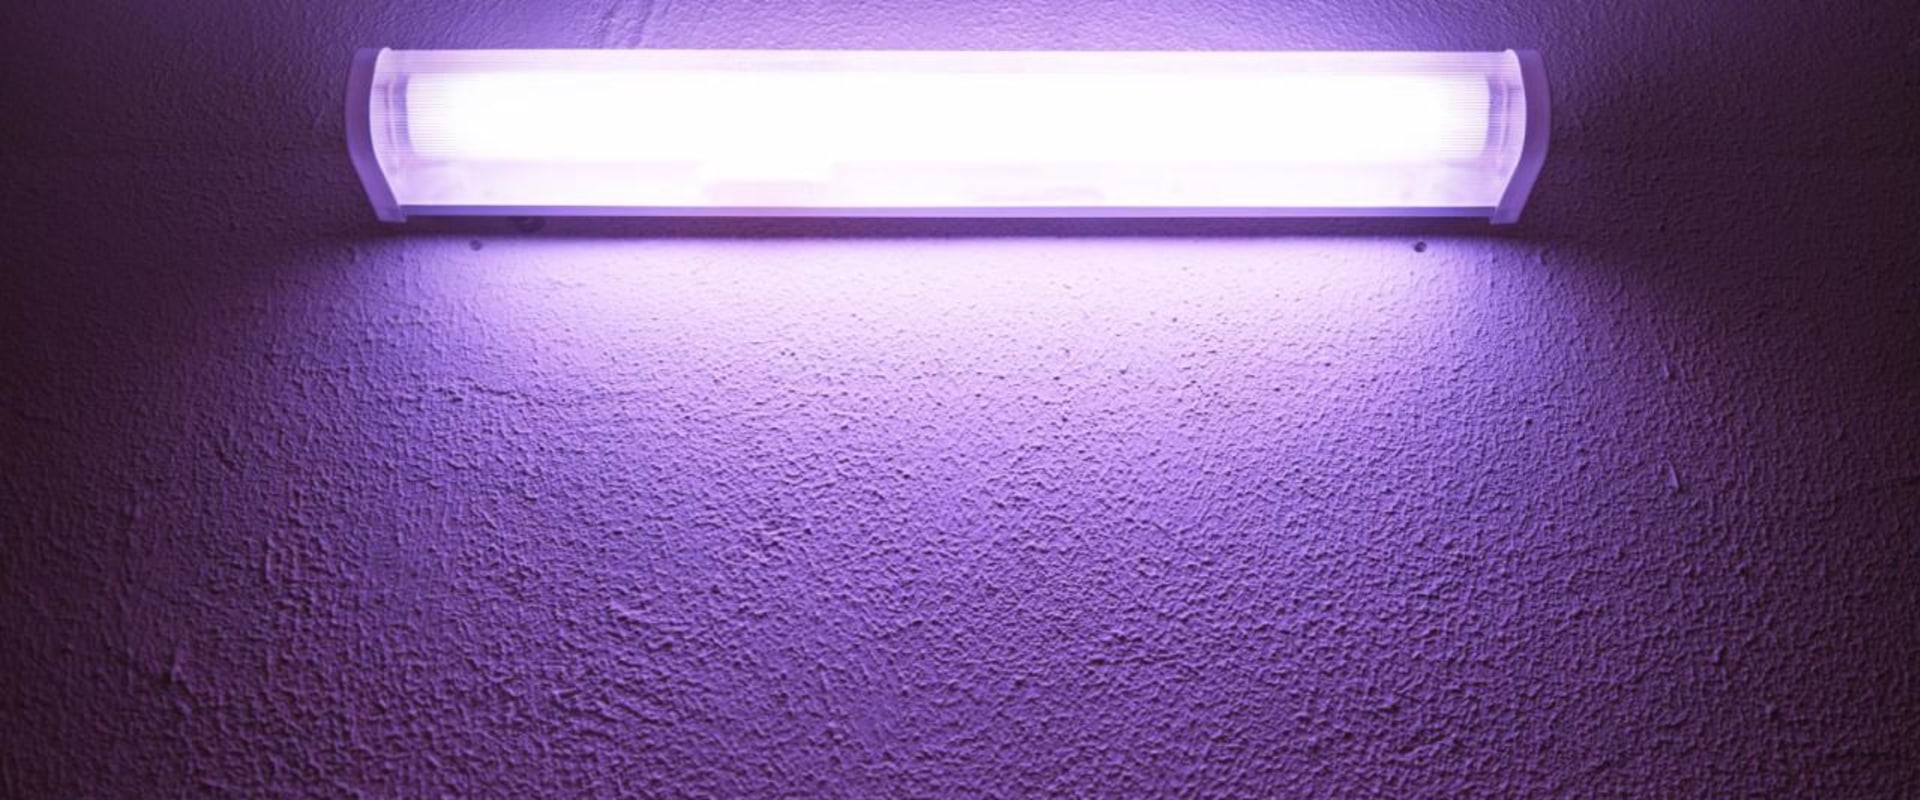 The Truth About UV Lights and Their Impact on Your Electricity Bill: An Expert's Perspective